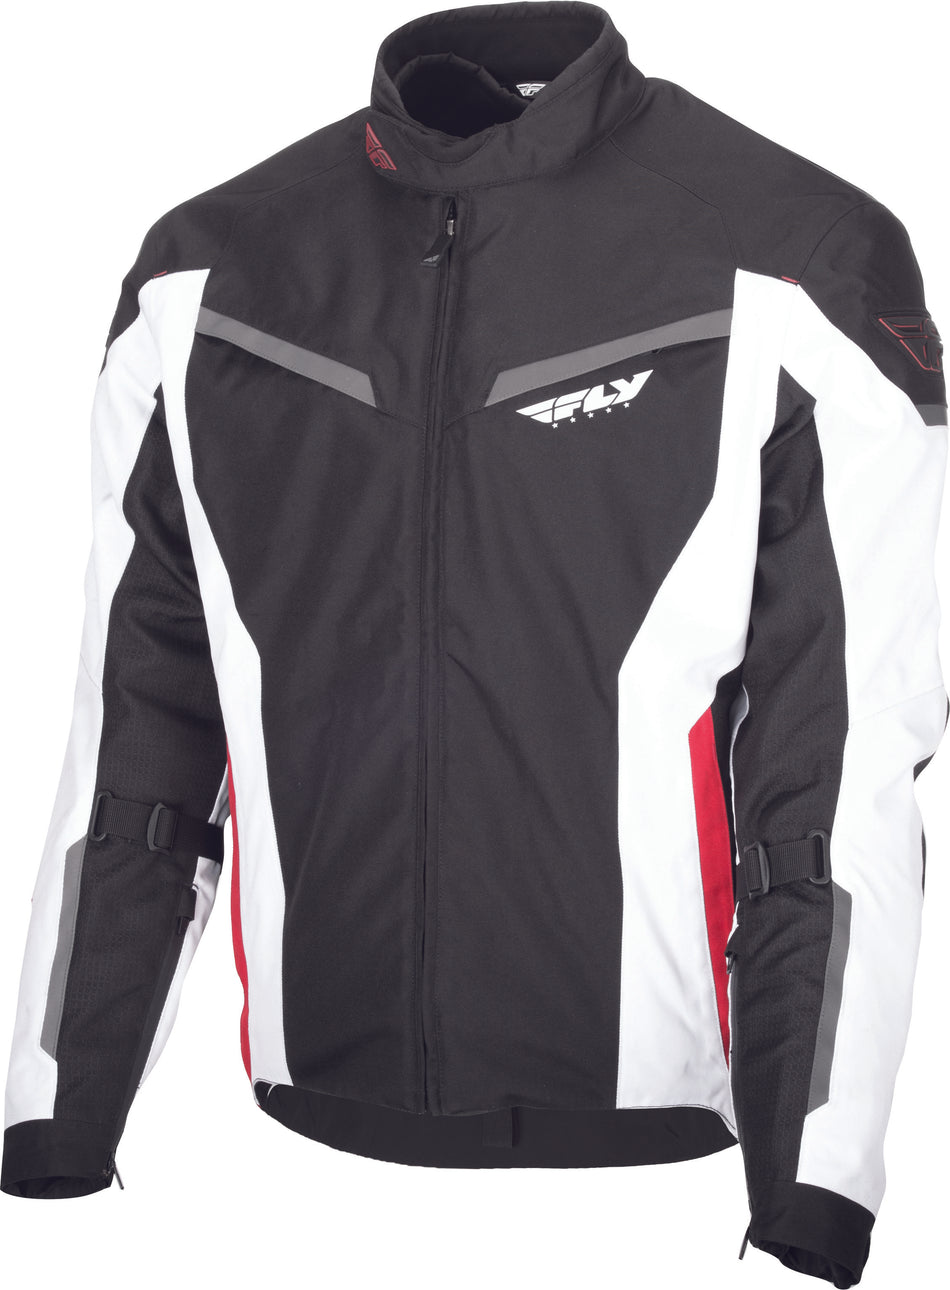 FLY RACING Strata Jacket Black/White/Red 2x 477-2101-6